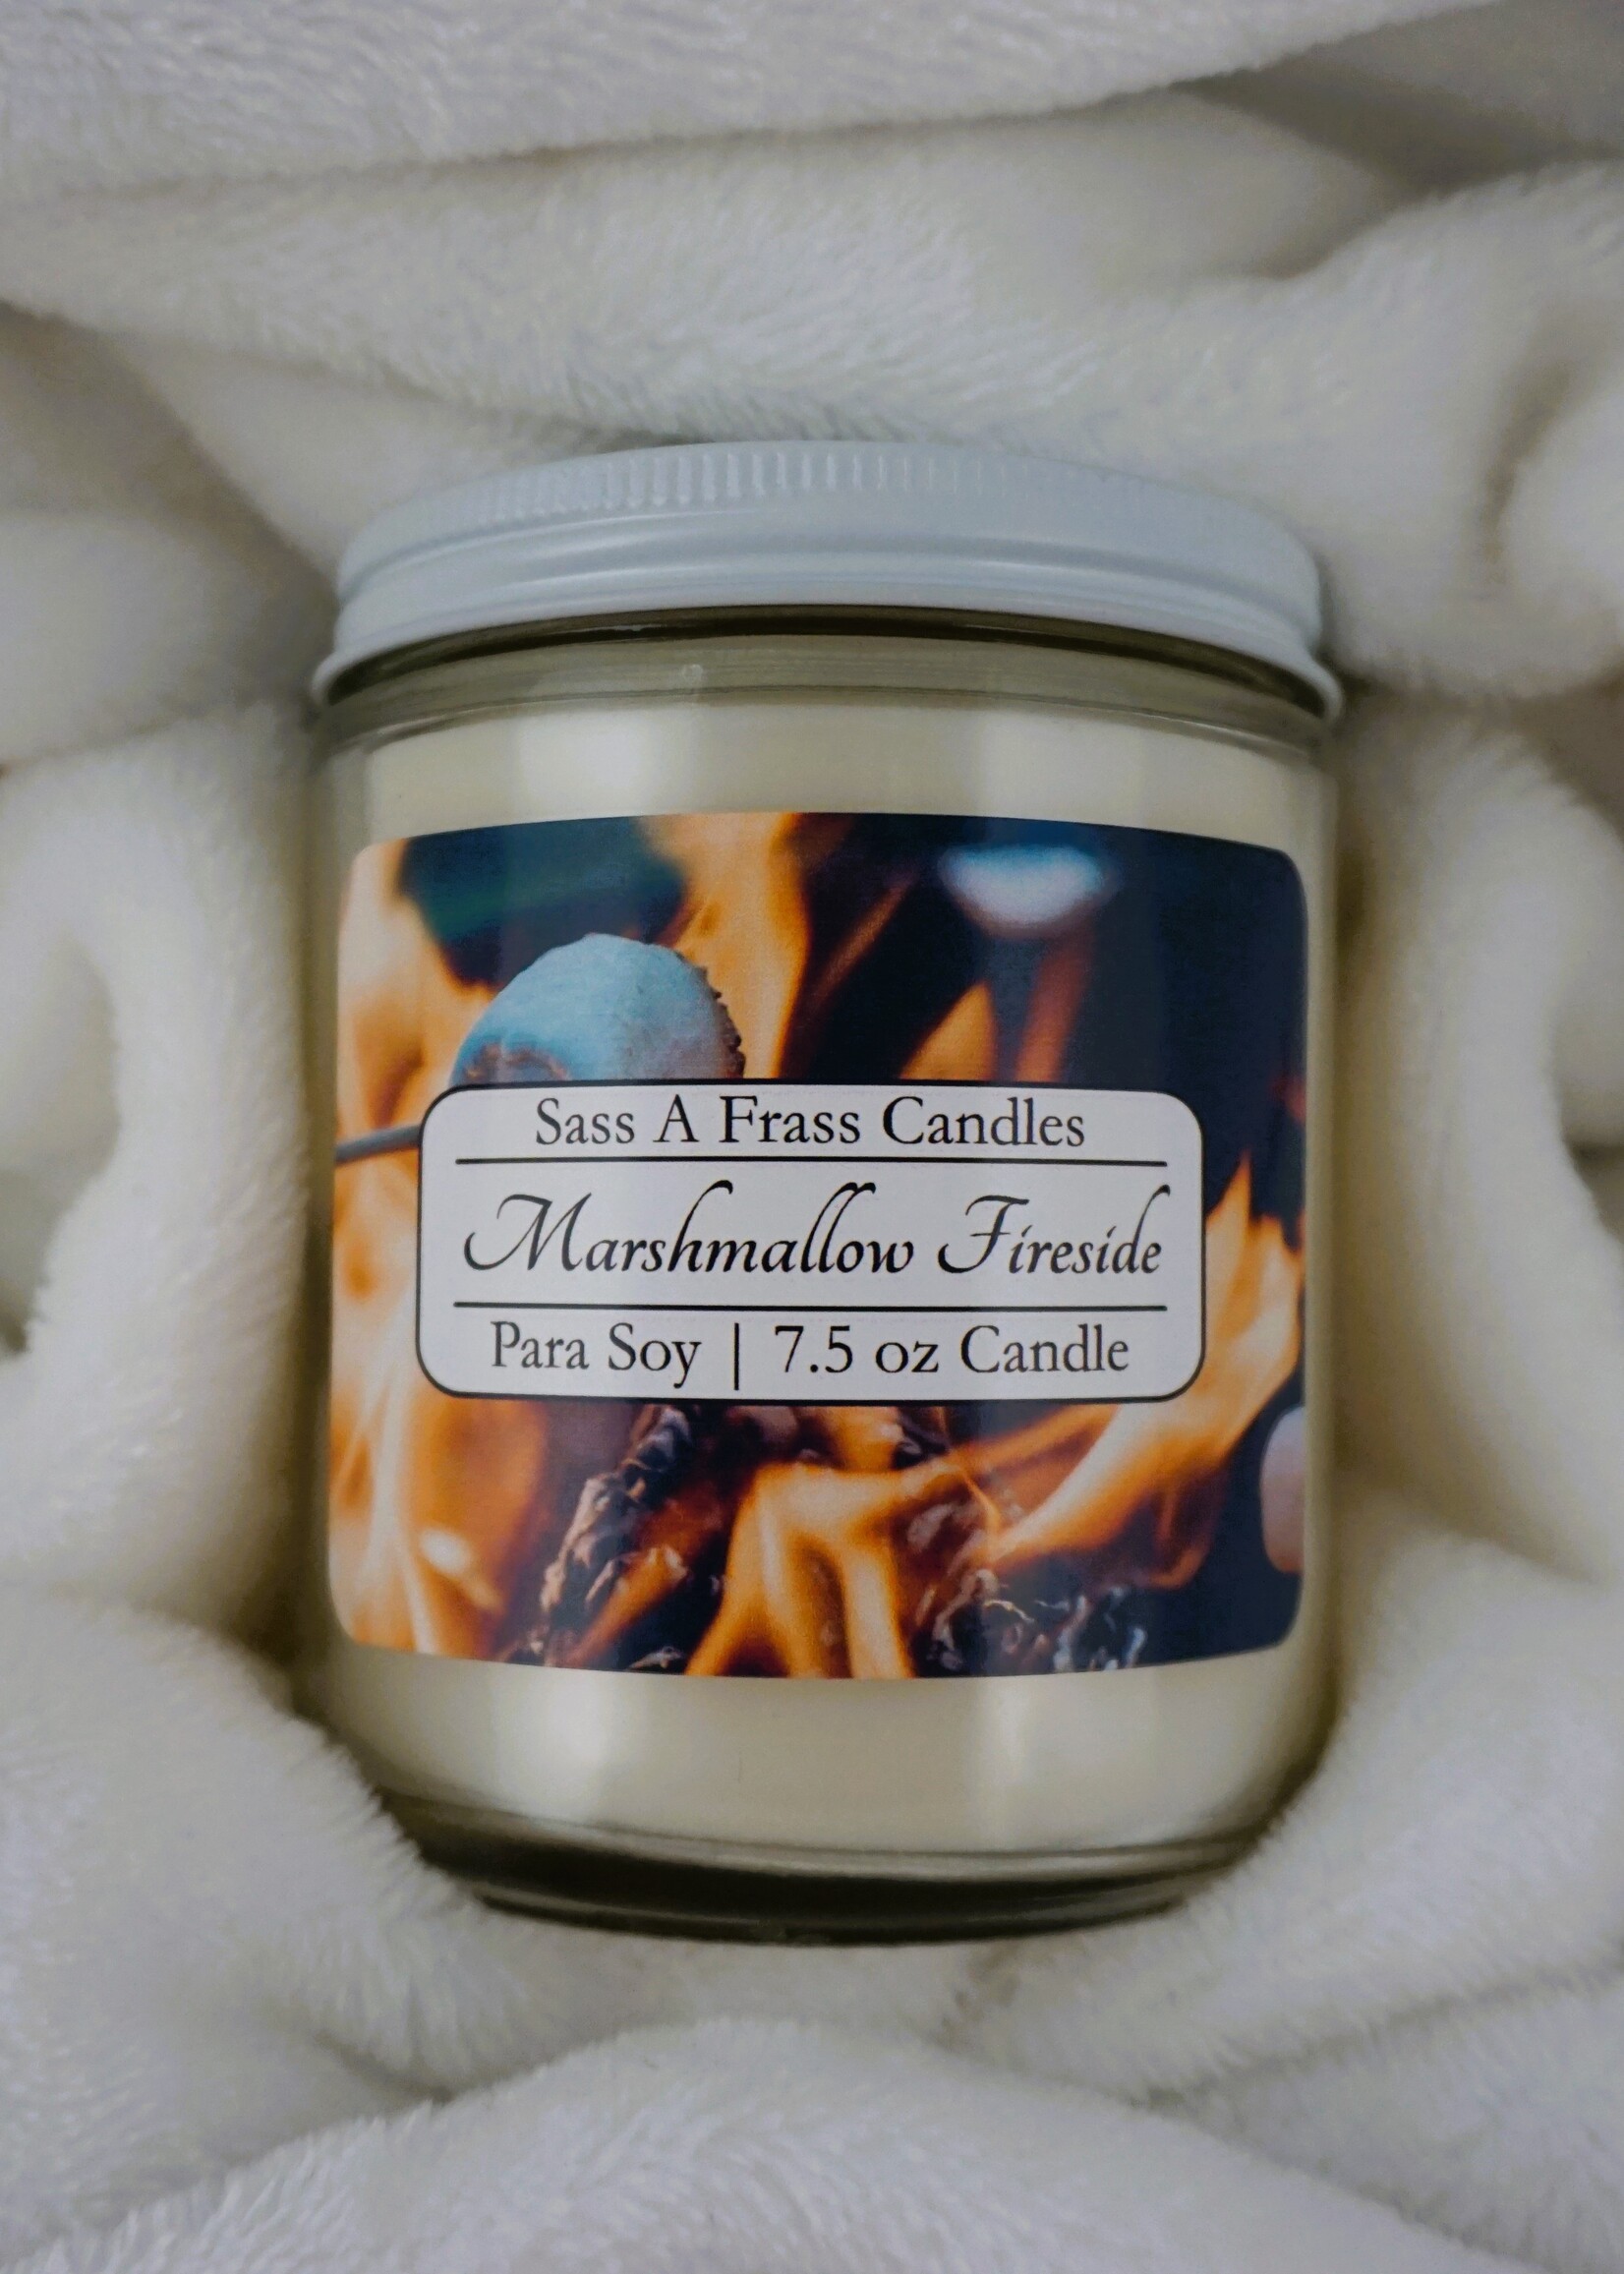 Marshmallow Fireside 7.5 oz Candle